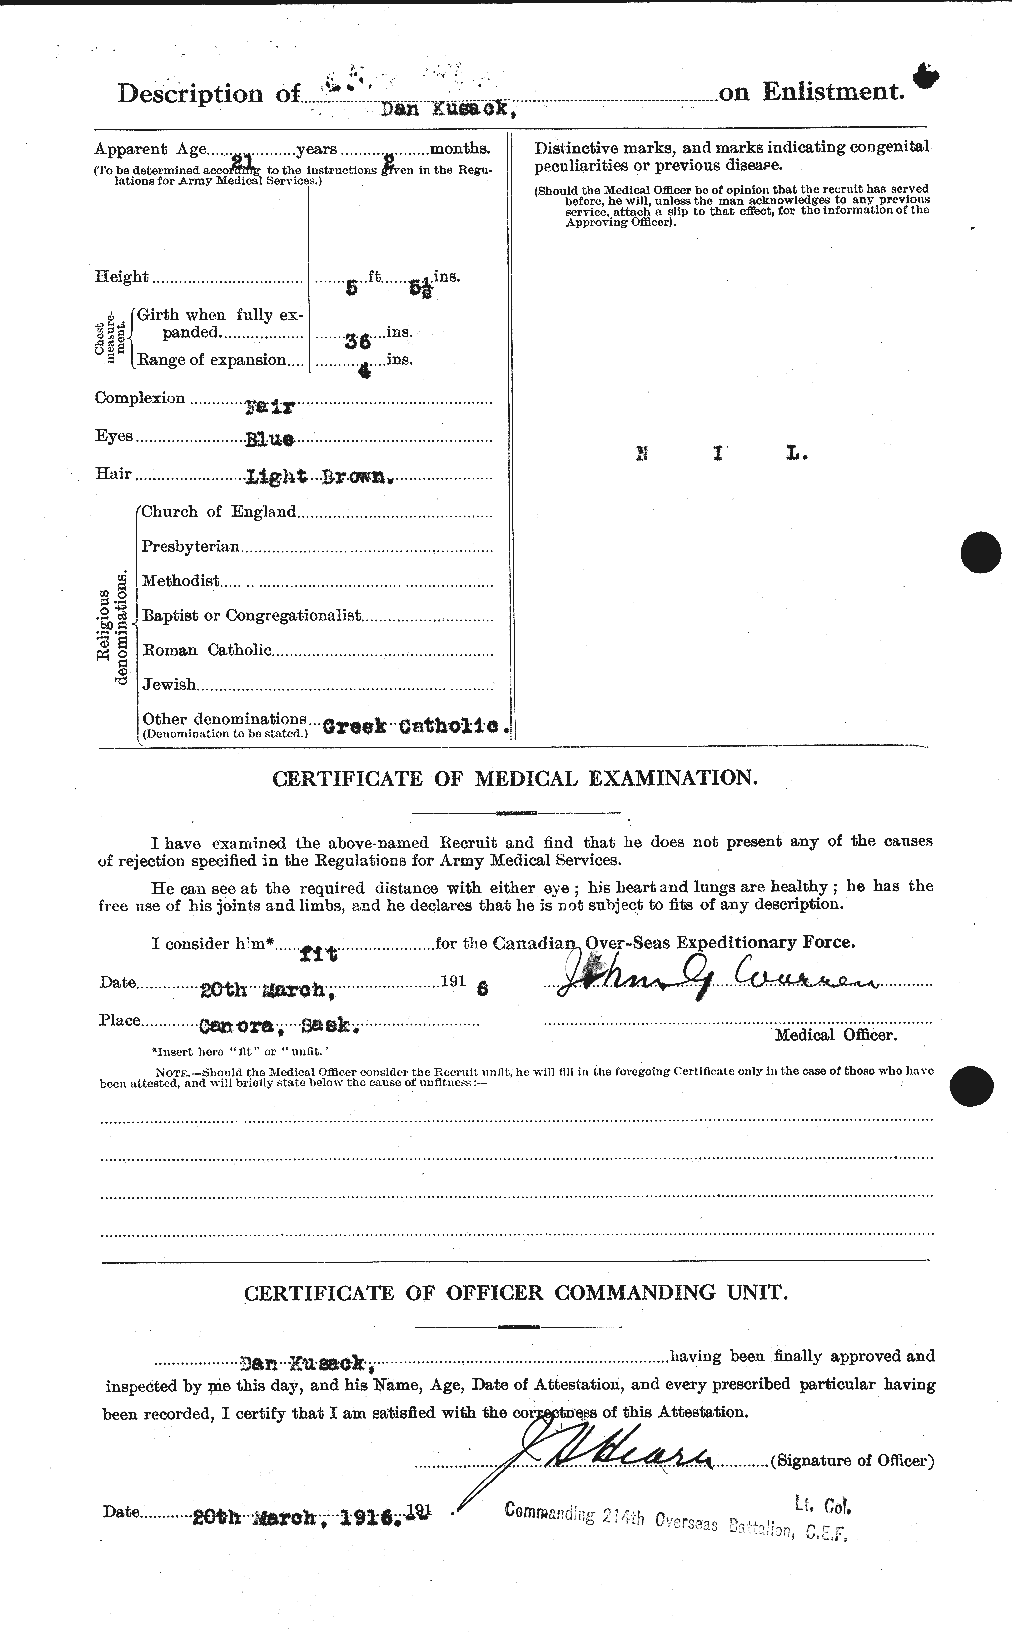 Personnel Records of the First World War - CEF 443565b